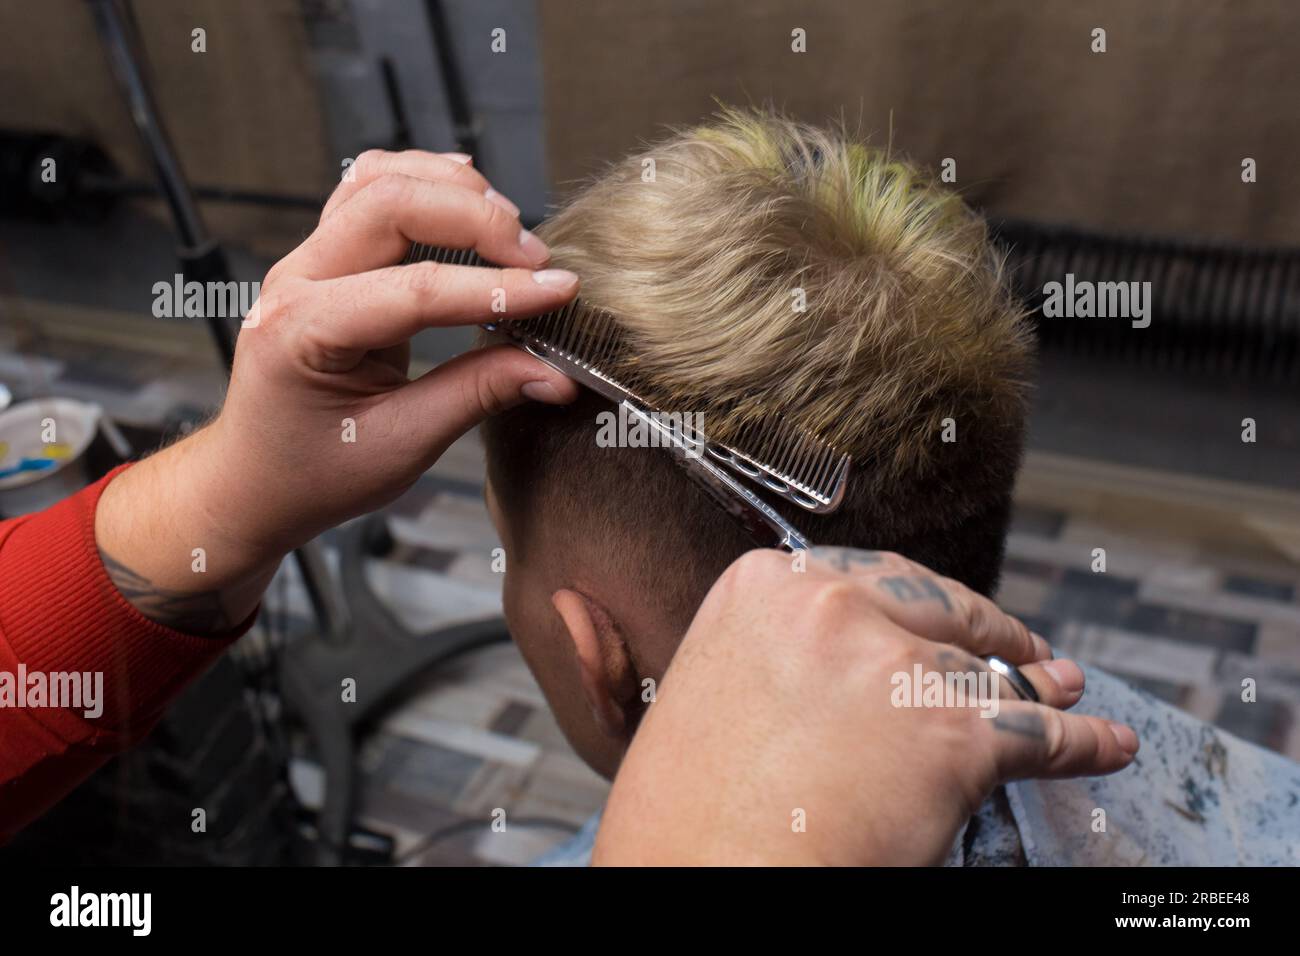 The hands of a professional male hairdresser with scissors and a comb cut the hair of a salon client at work. Stock Photo